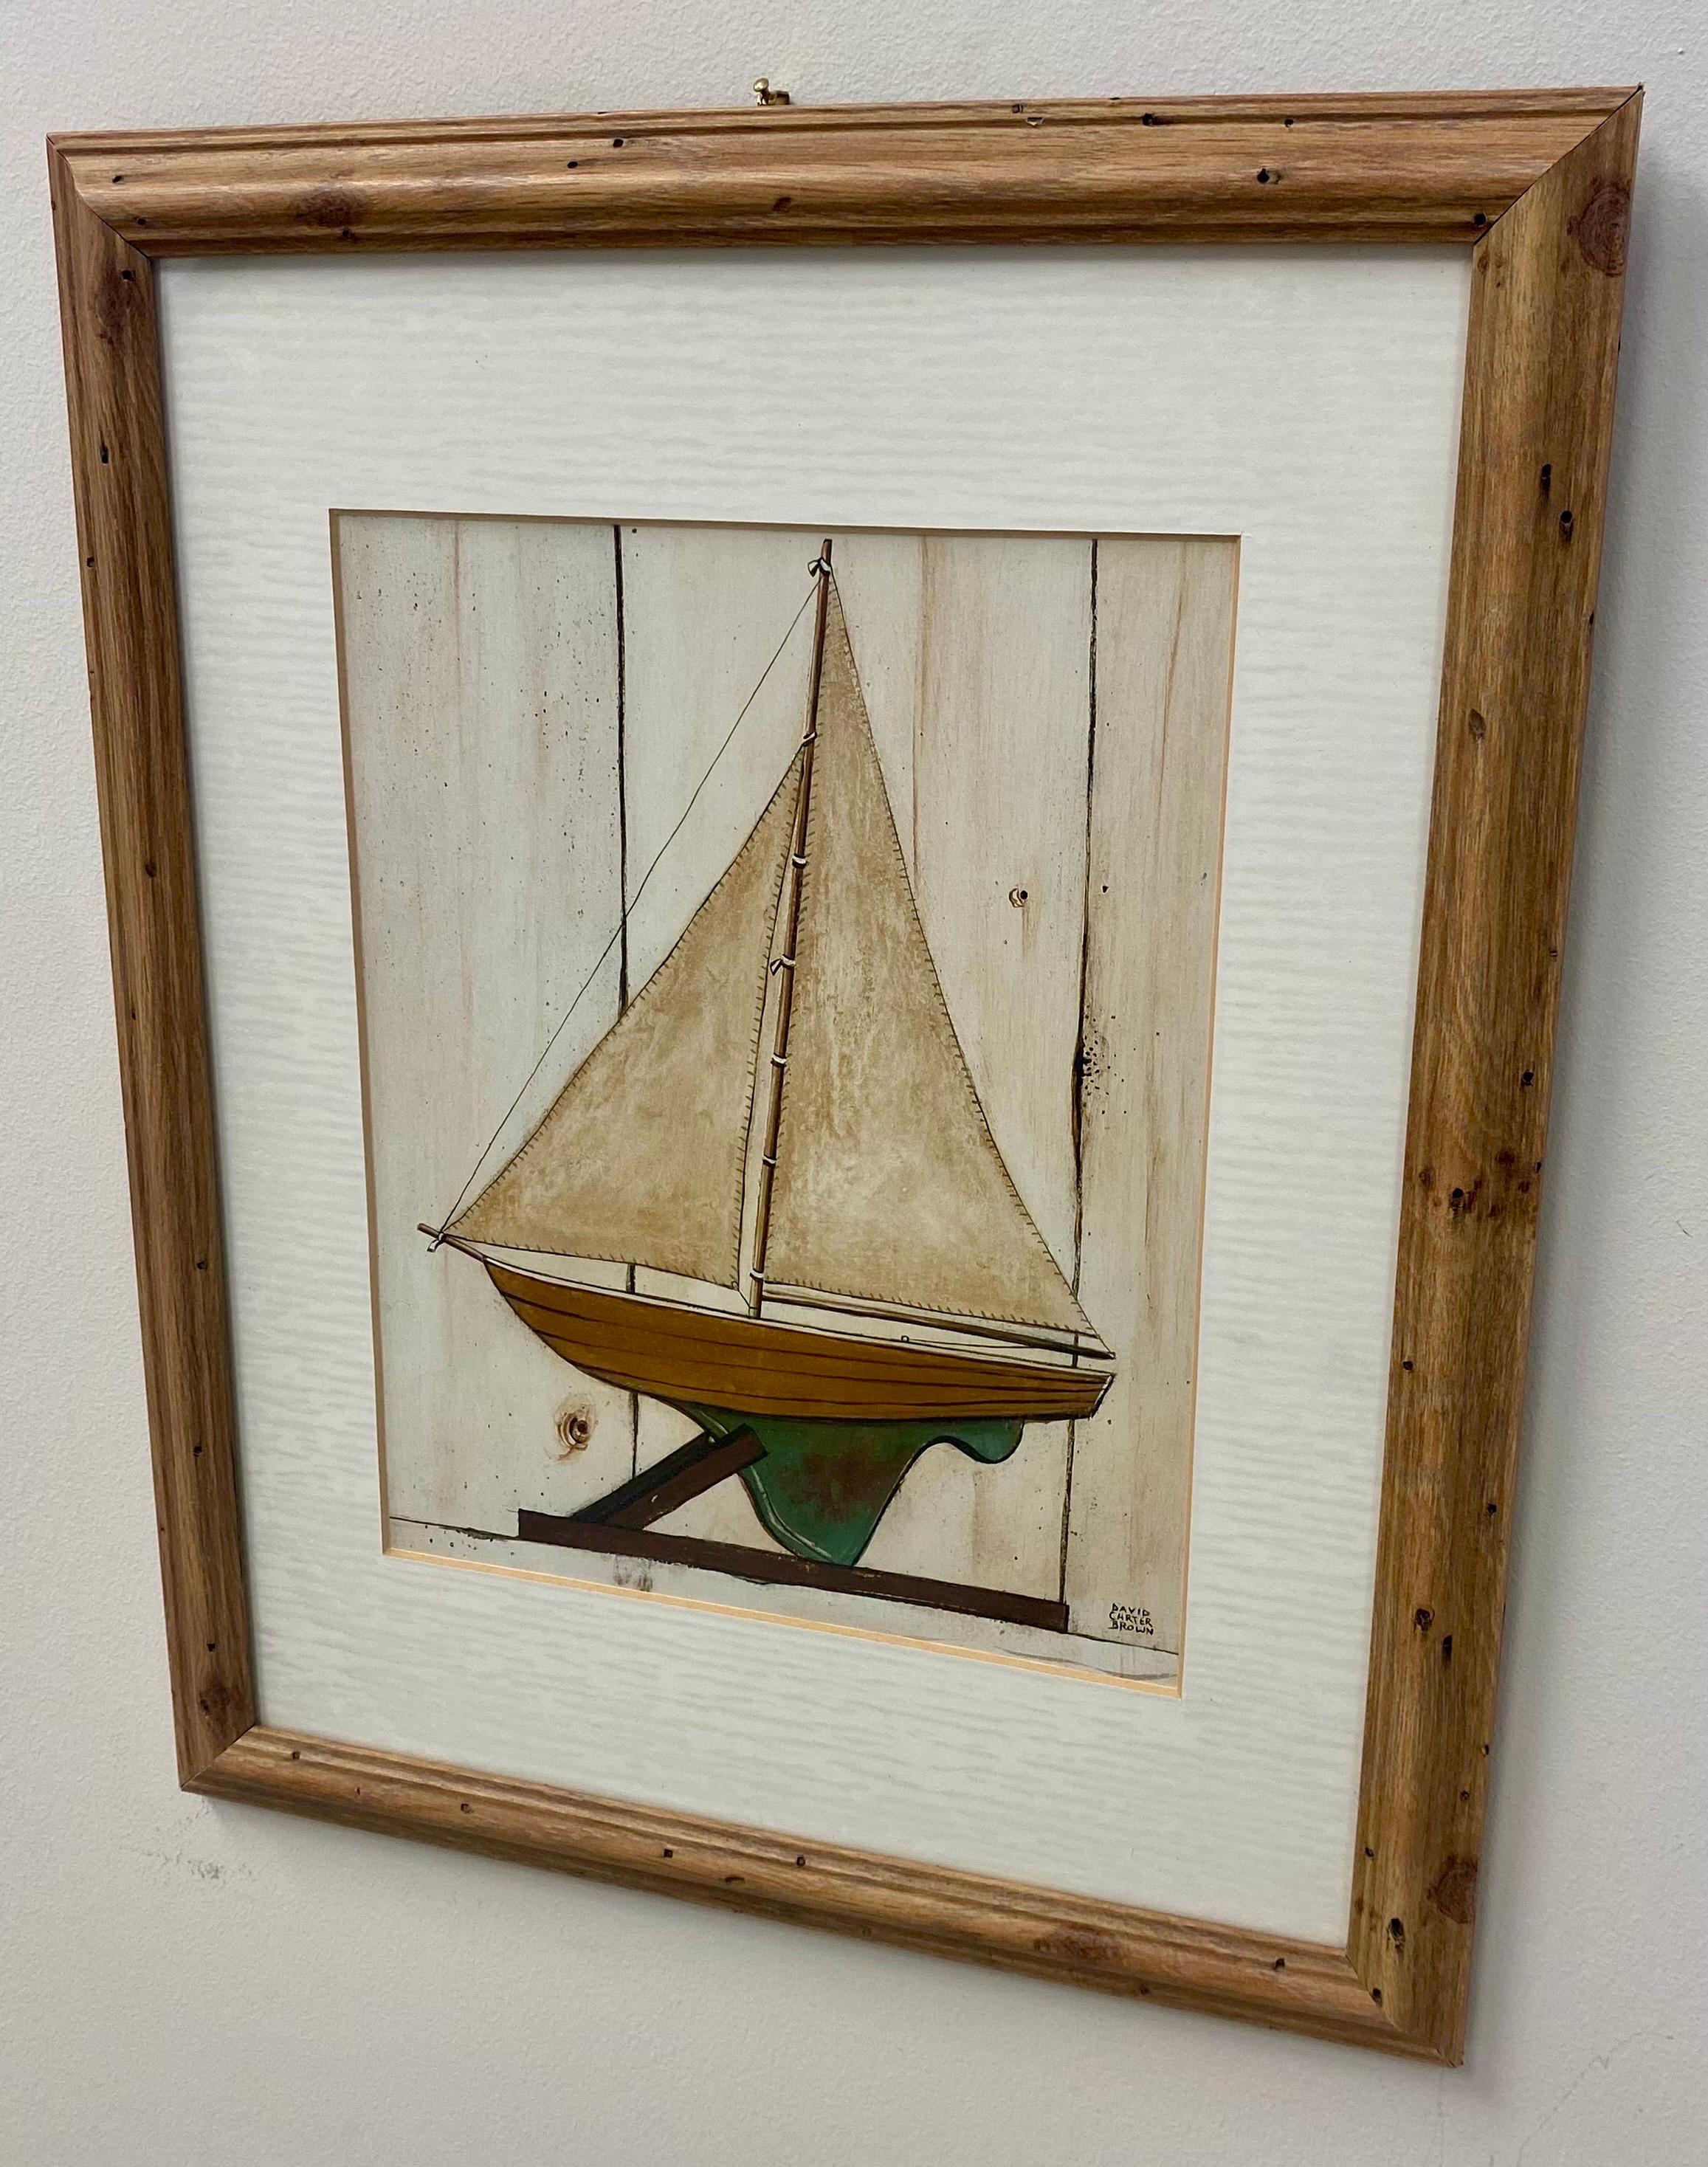 An American Folk Art sail boat model print by David Carter Brown ( American ). The sail model print feature earthy brown colors and is signs by the artist in the bottom right. The art work is finely presented in a white matting and matching custom